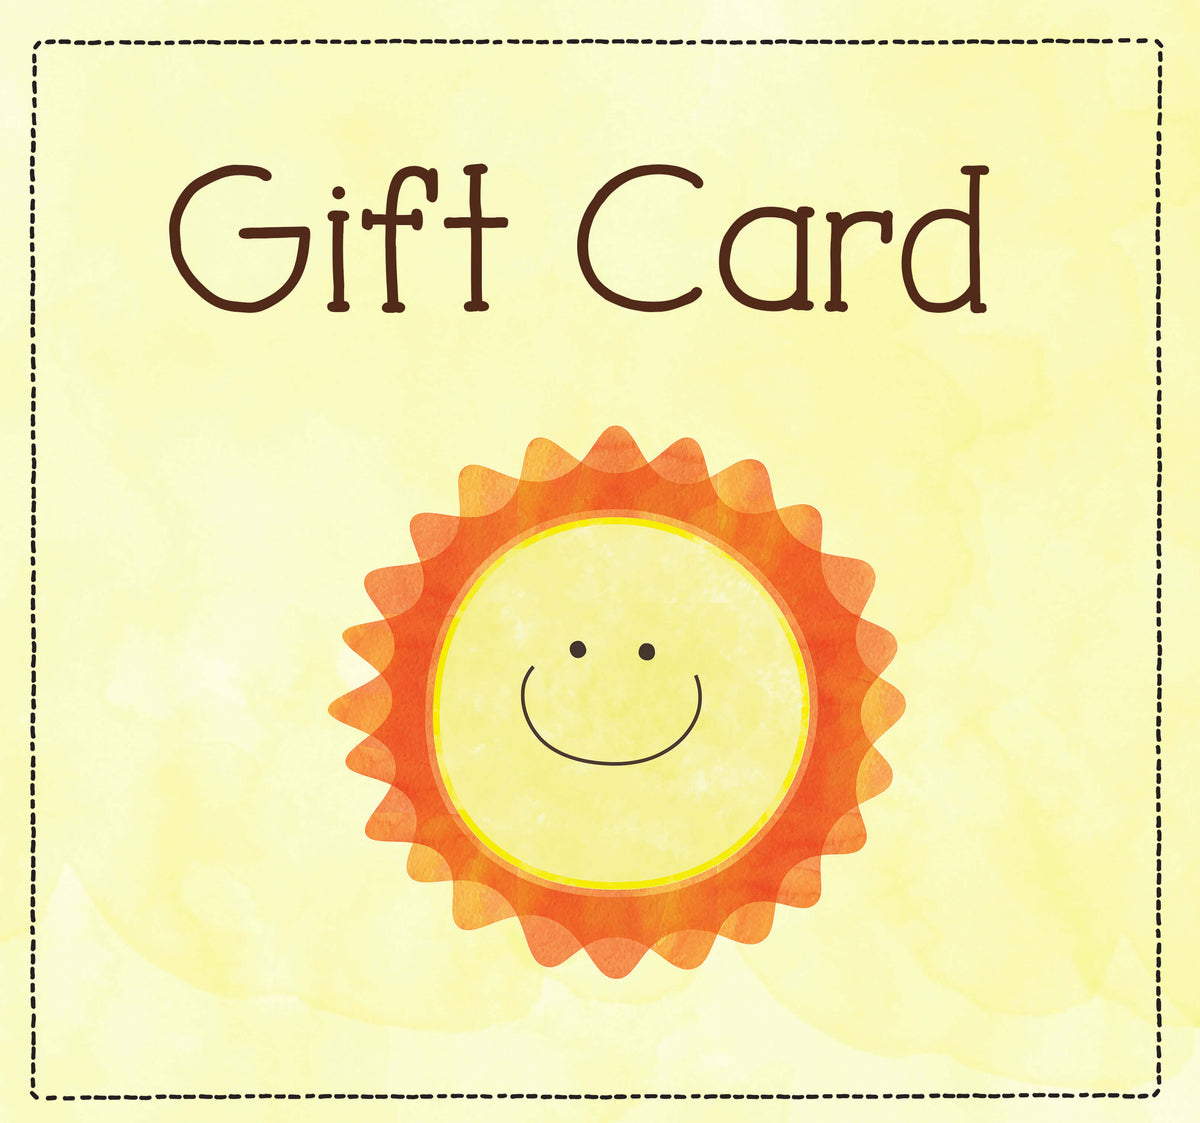 The Creativity Patch Gift Card